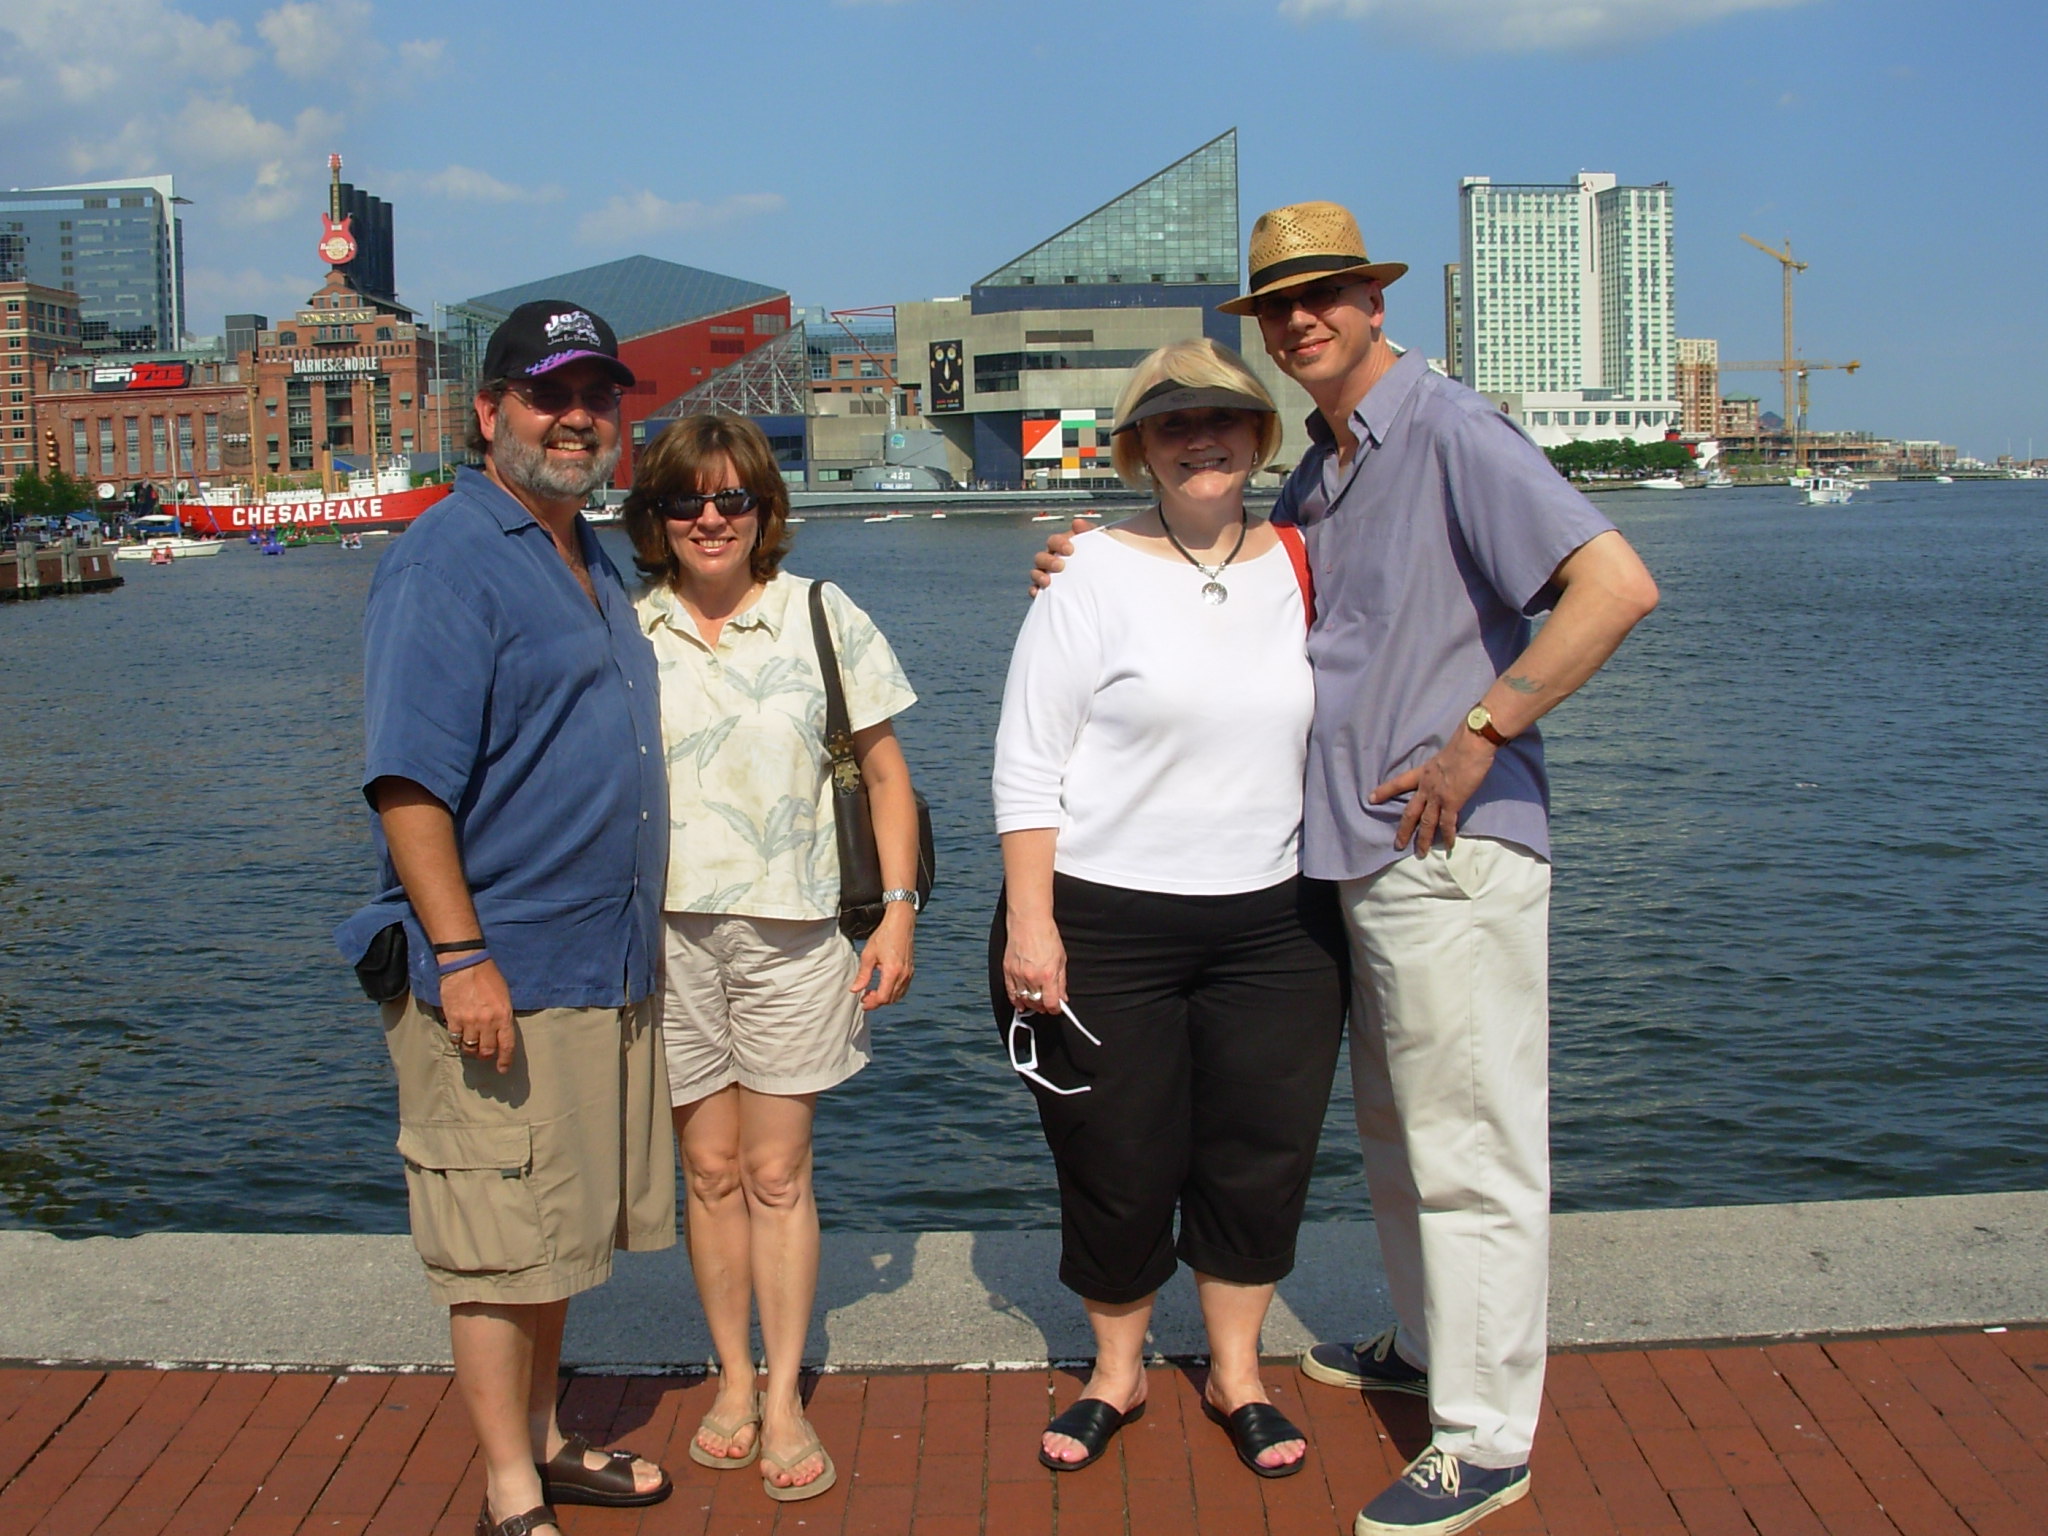 Wise's and Graeff's in Baltimore July 2008
